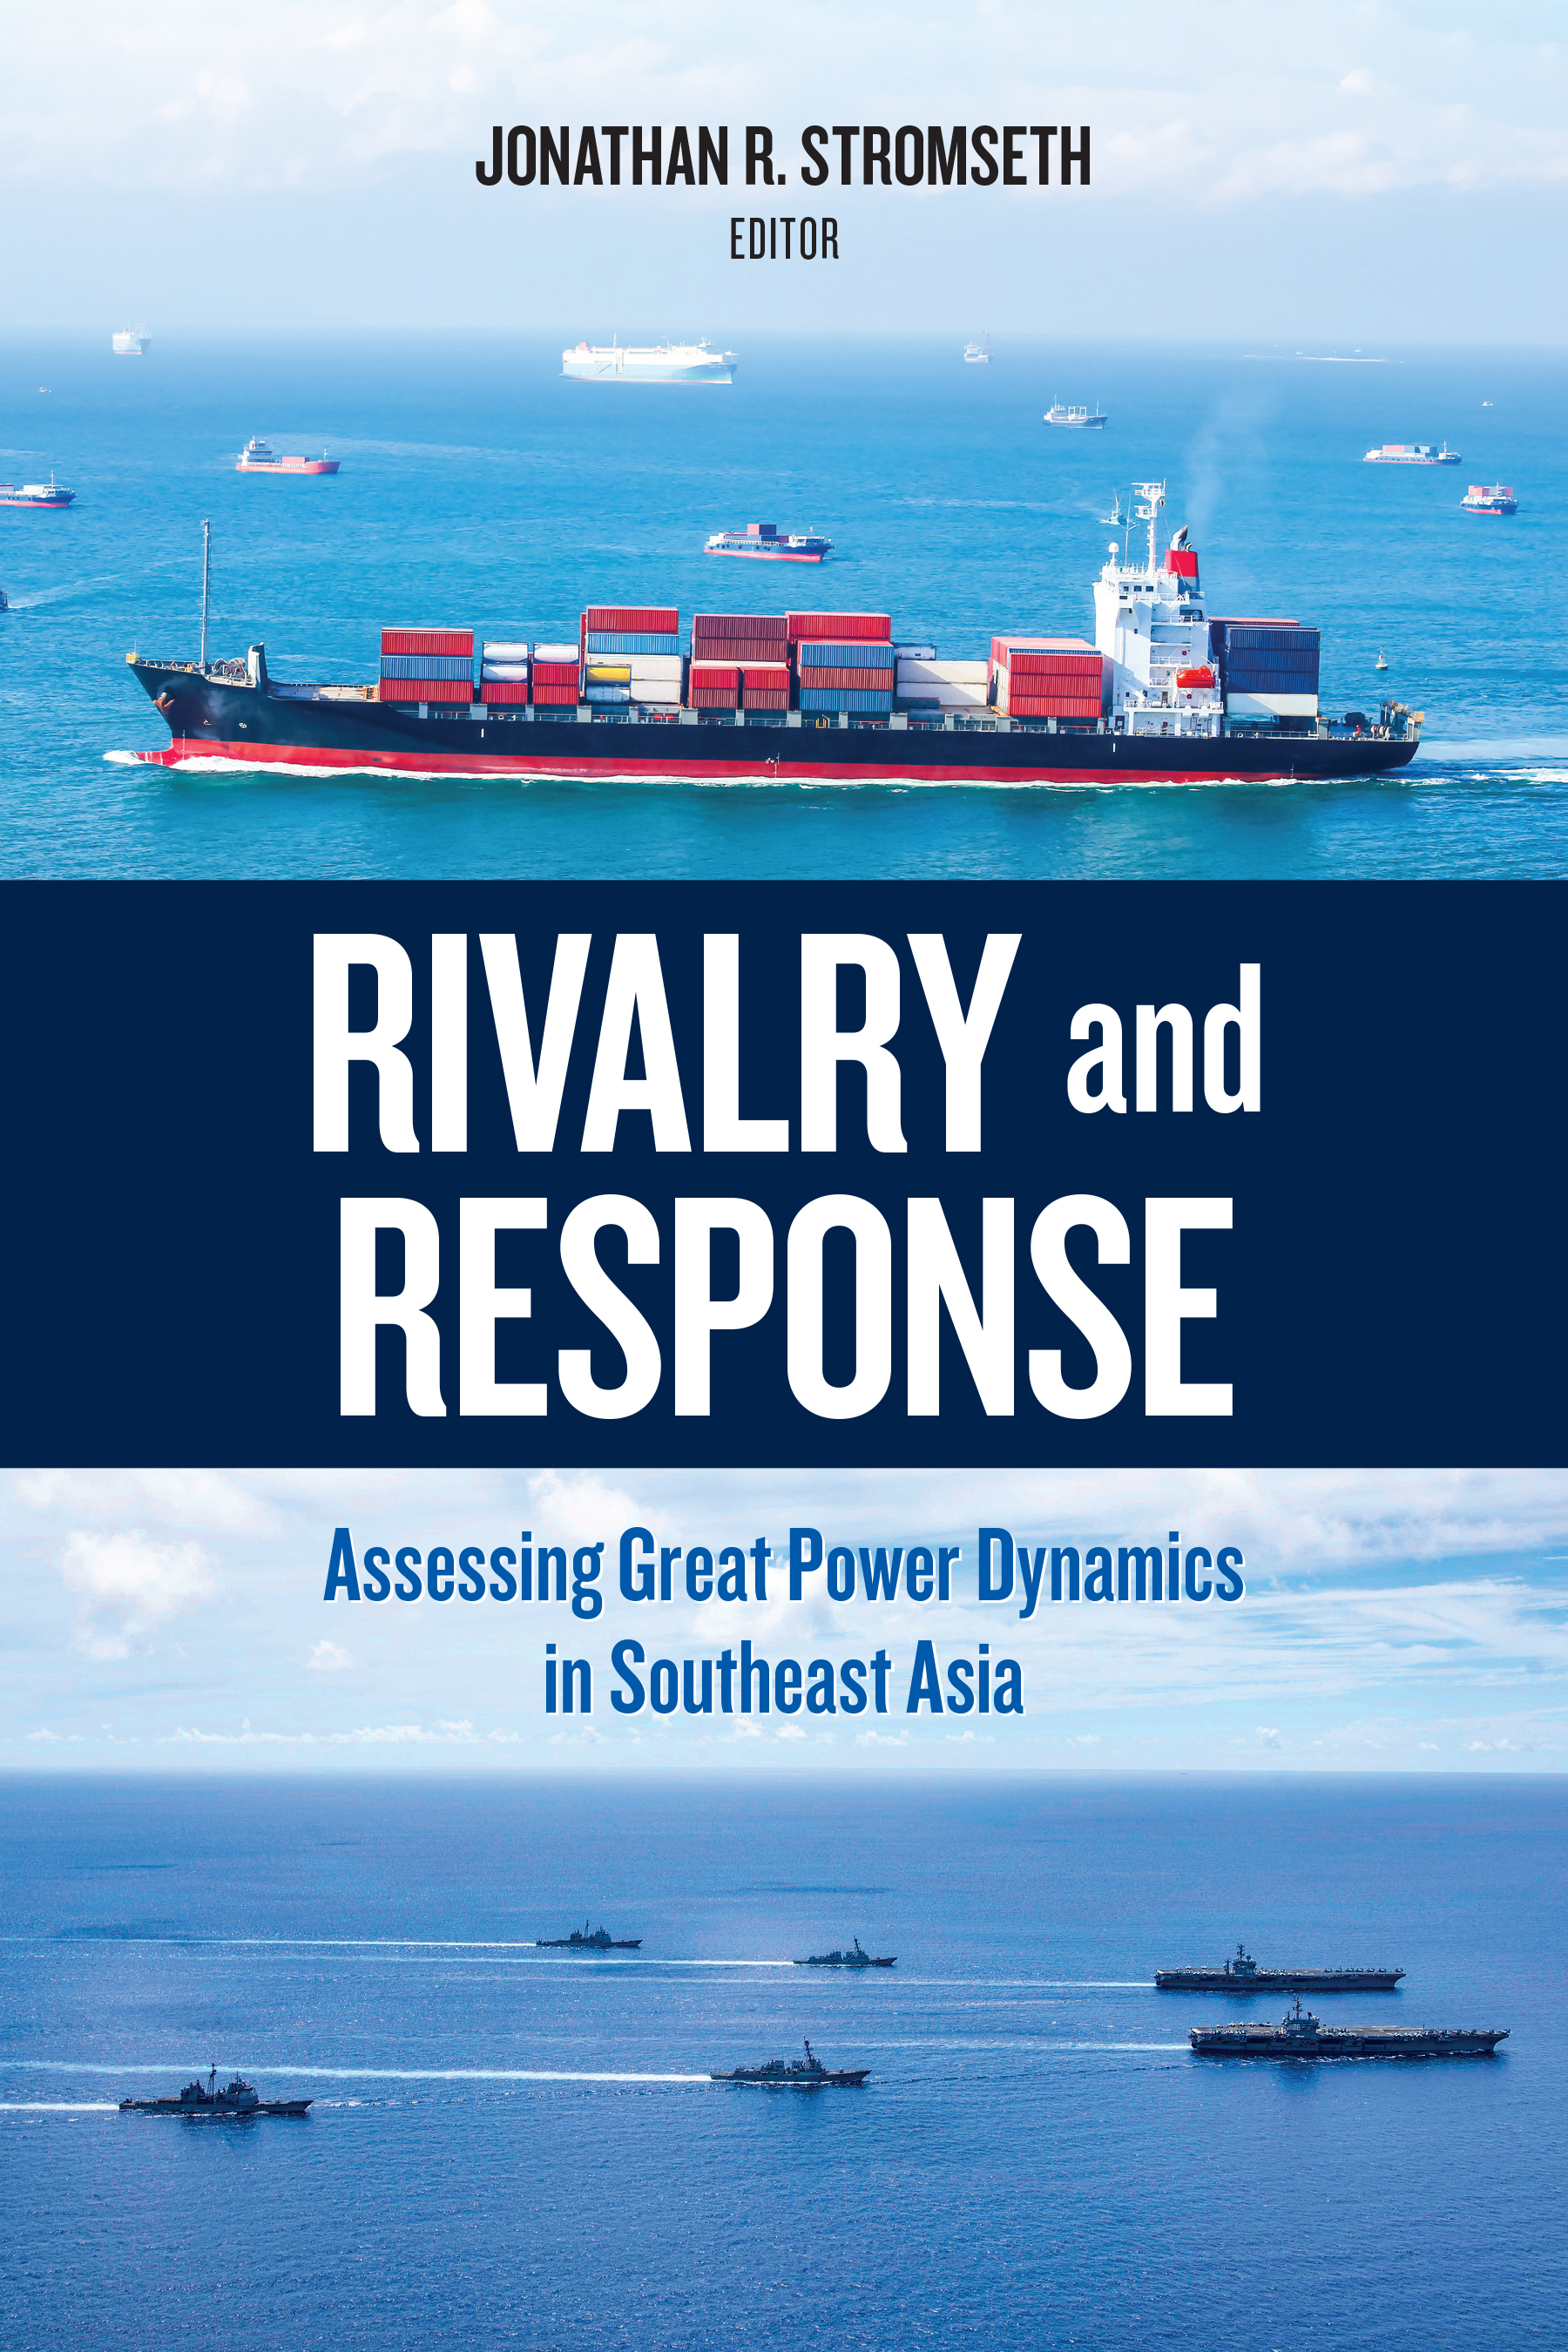 Cvr: Rivalry and Response